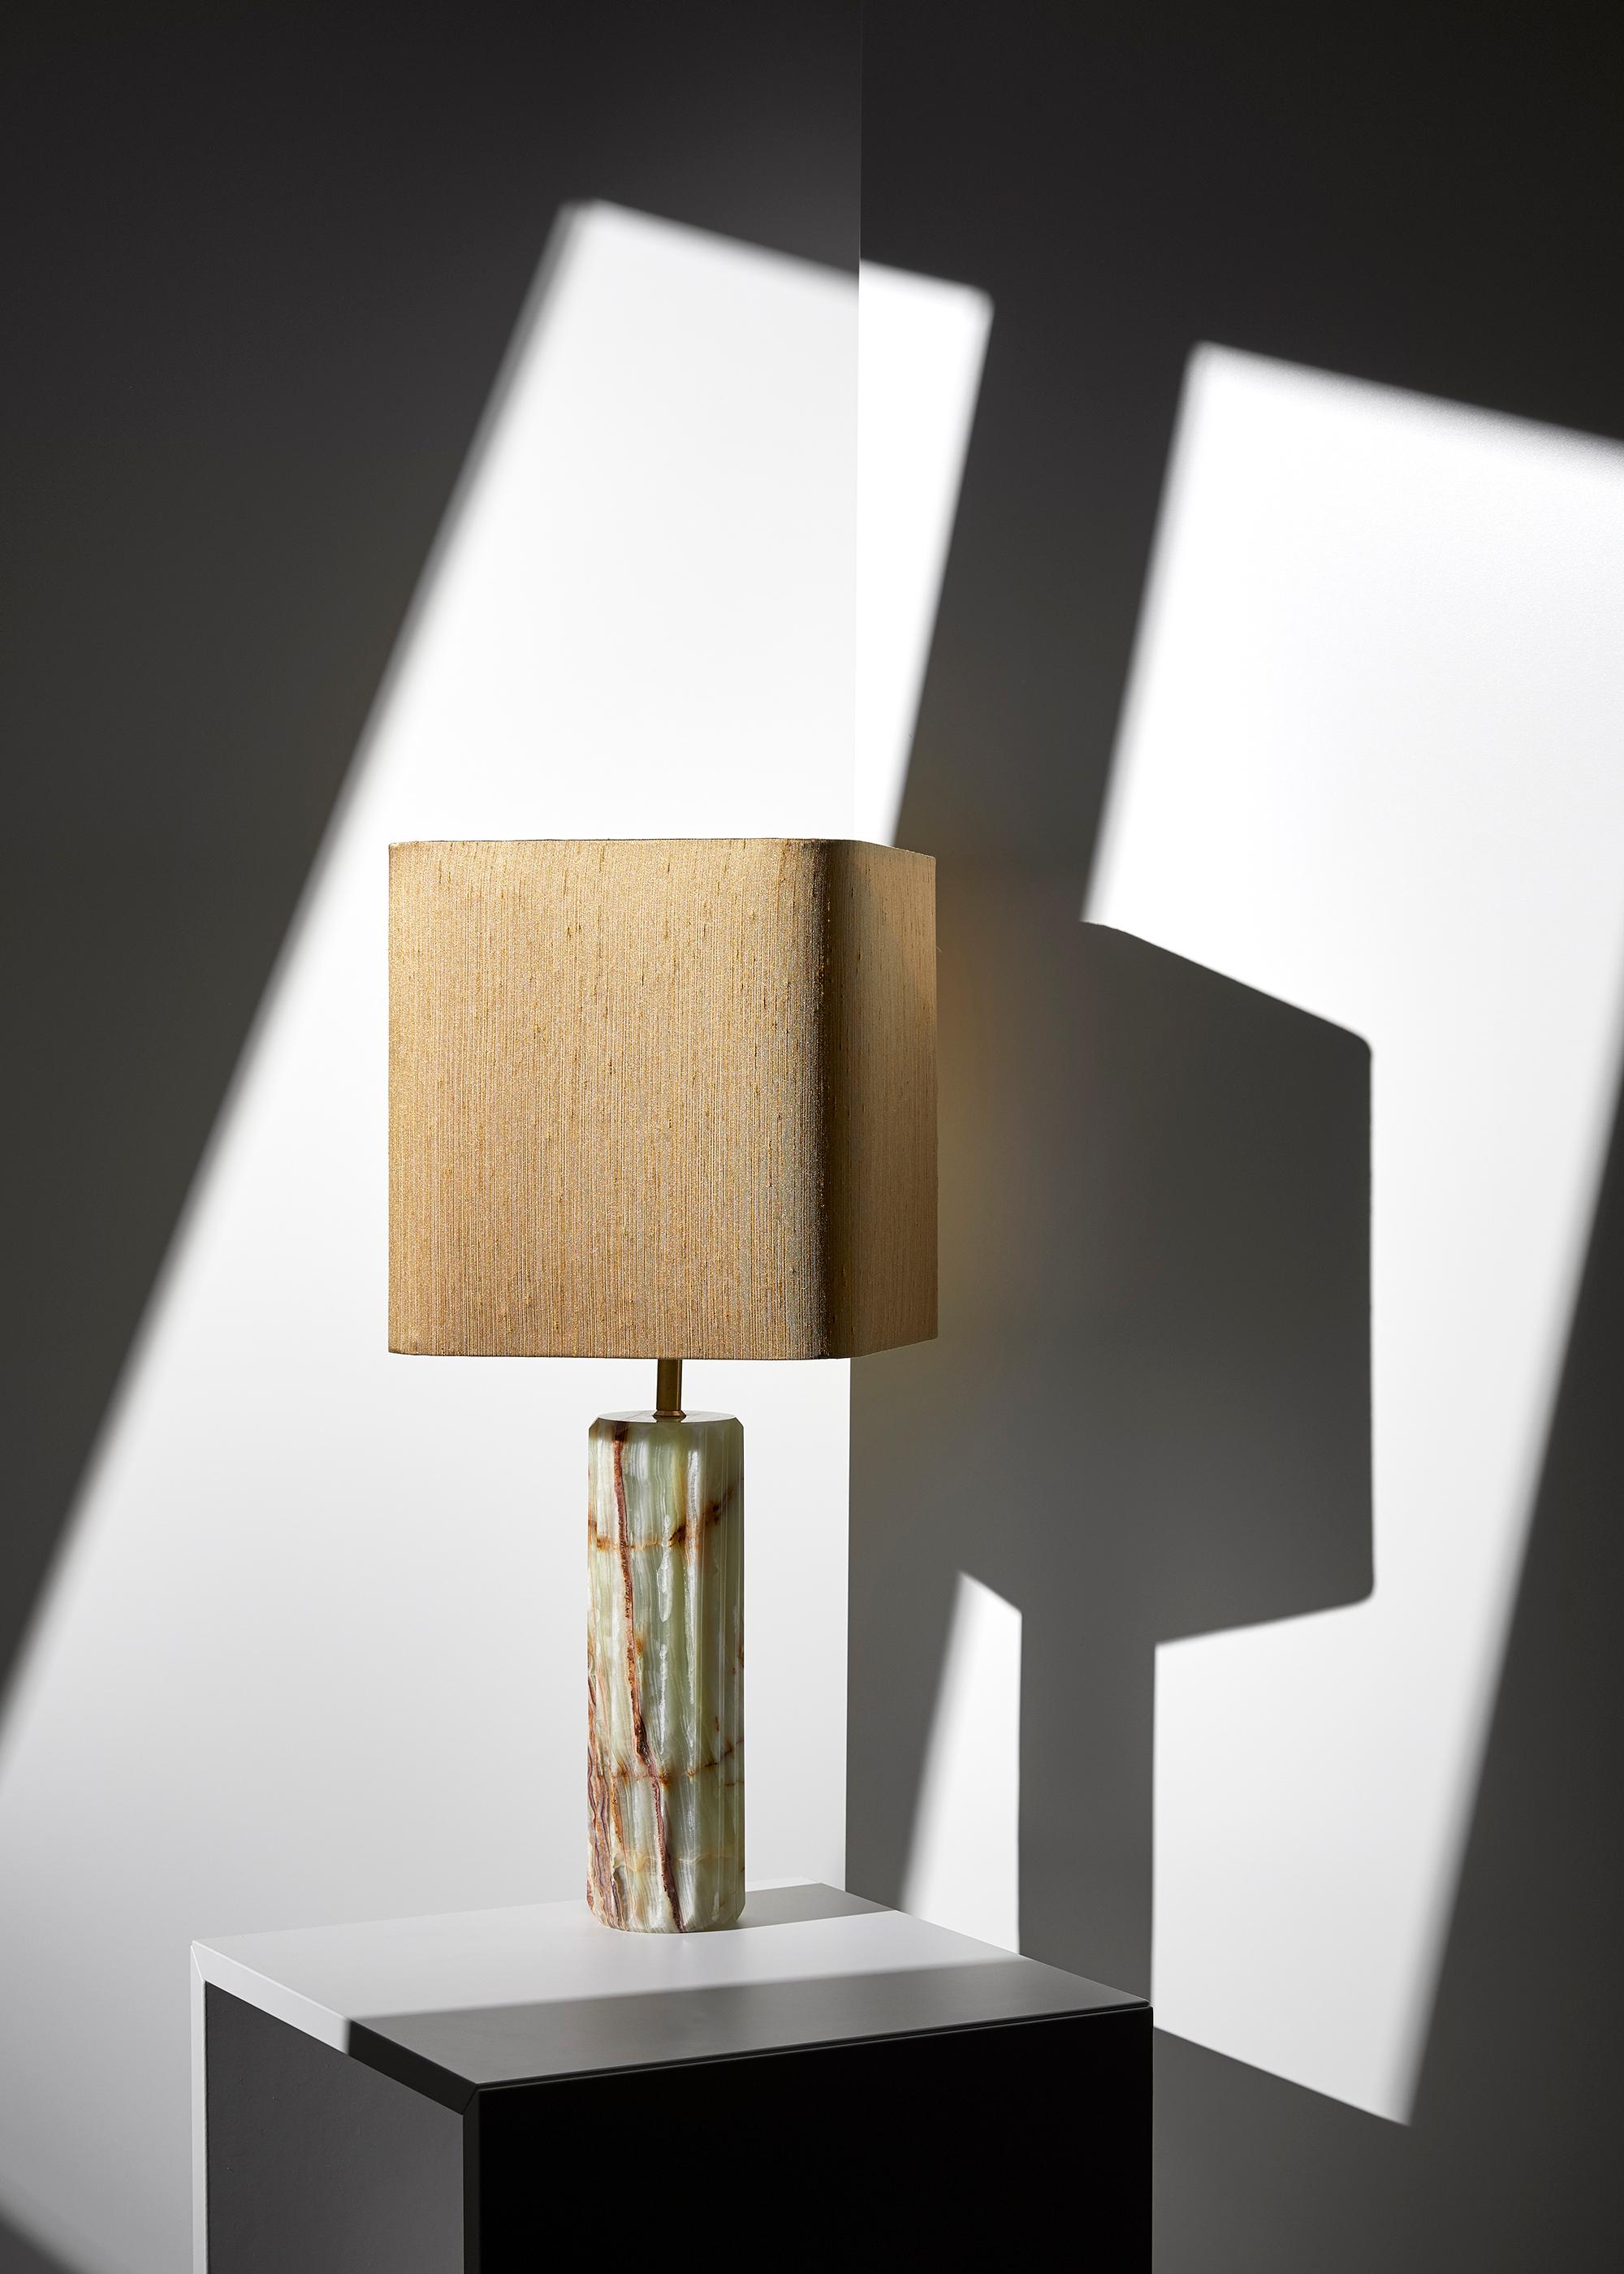 Onyx Proud Table Lamp by Lisette Rützou
Dimensions: 25 x H 55 cm
Materials: Onyx

All our lamps can be wired according to each country. If sold to the USA it will be wired for the USA for instance.

 Lisette Rützou’s design is motivated by an